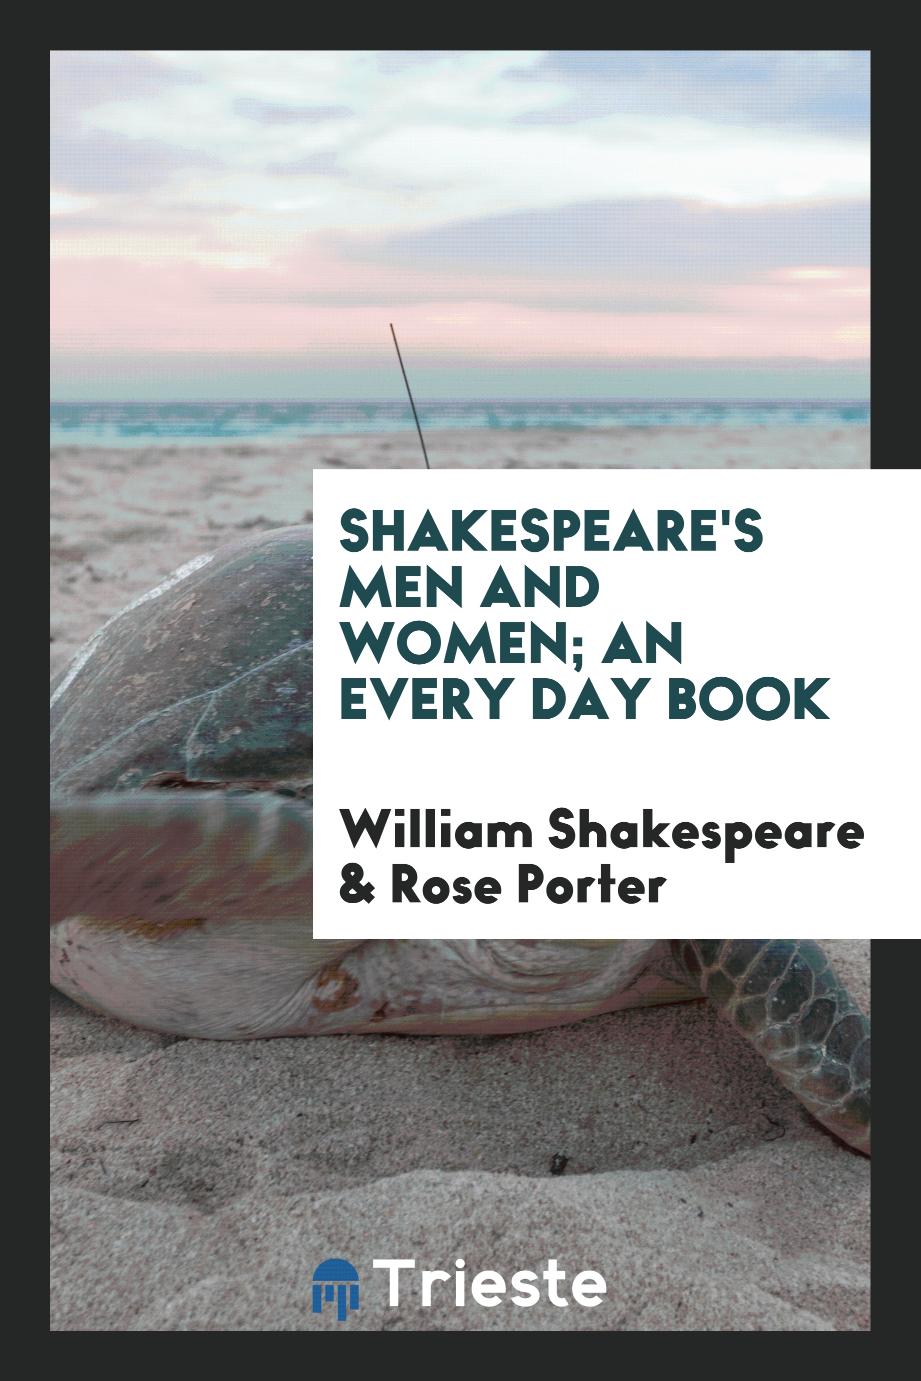 Shakespeare's men and women; an every day book